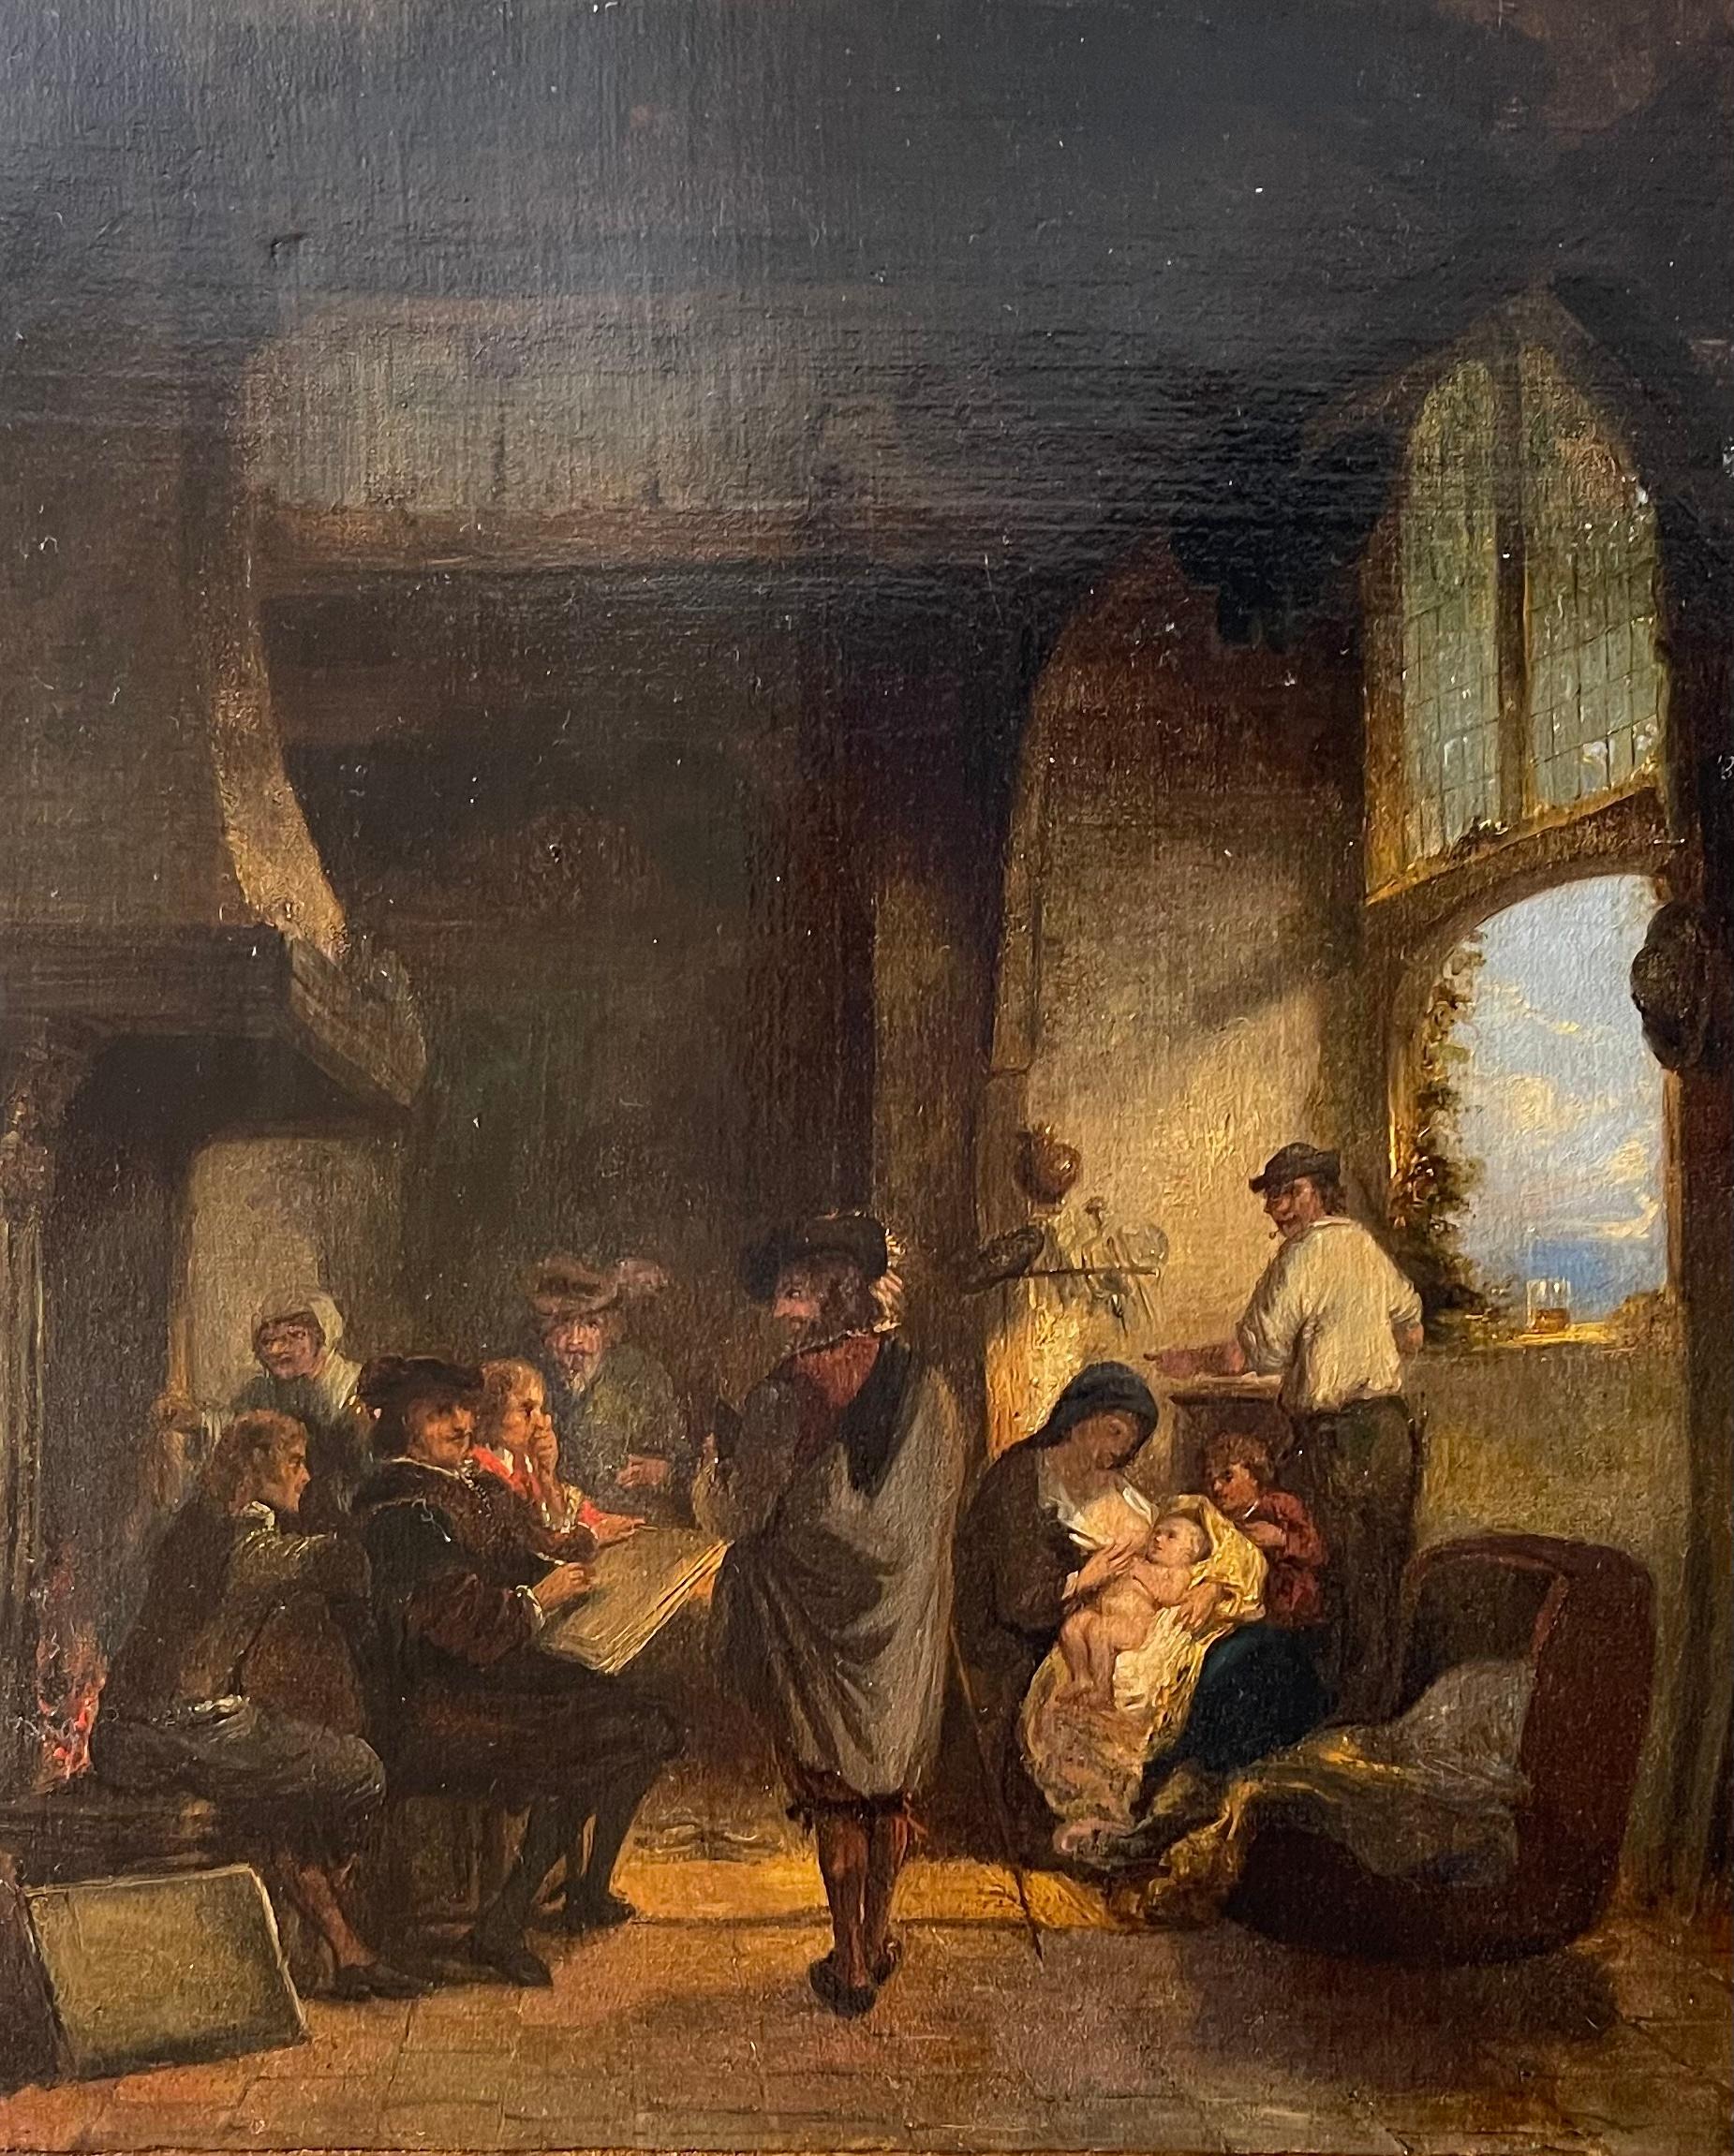 This beautiful Flemish painting from the second half of the 17th century closely resembles the works of the great artist Adriaen Brouwer.
It depicts a classic Flemish interior with lively figures caught in naturalistic attitudes typical of